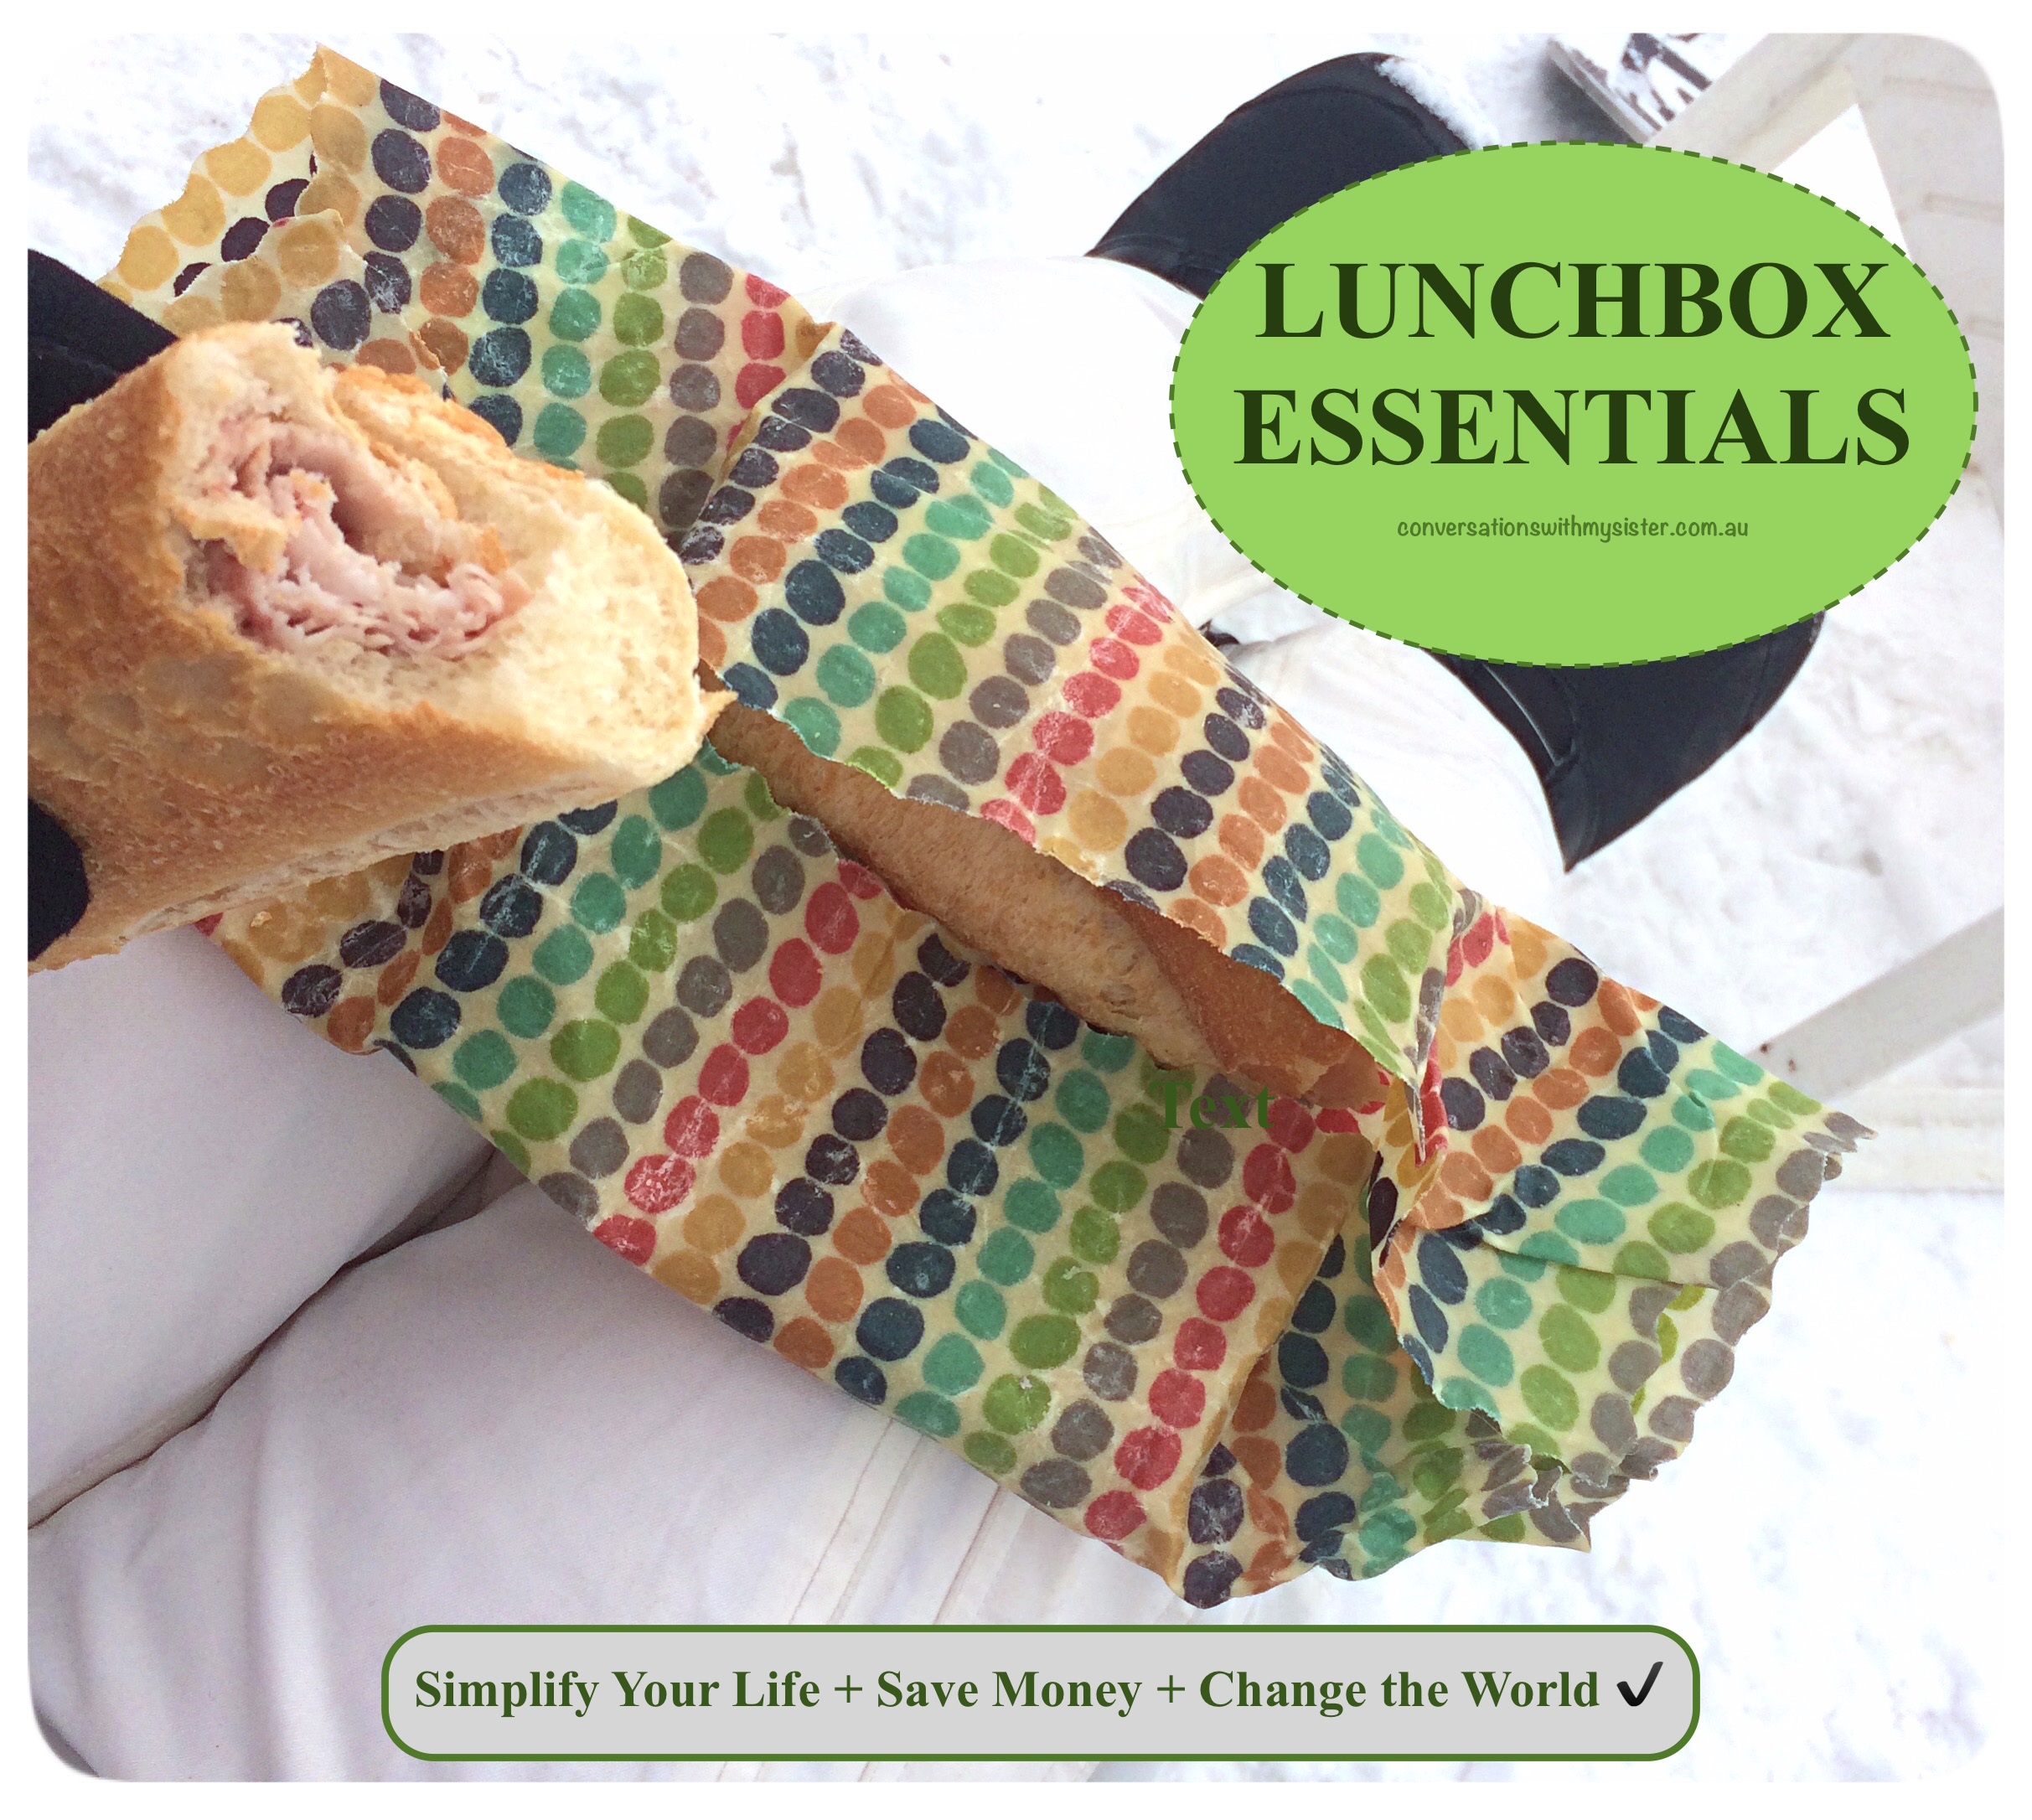 Tried and Tested, Zero Waste Lunch box Essentials for back to school families, conscious travellers and people on the go! In this article you will find product reviews, convenient shopping links, recipe suggestions and a crafty #DIY to help get you well on the way to successfully packing nude and nutritious lunch boxes each and every day.